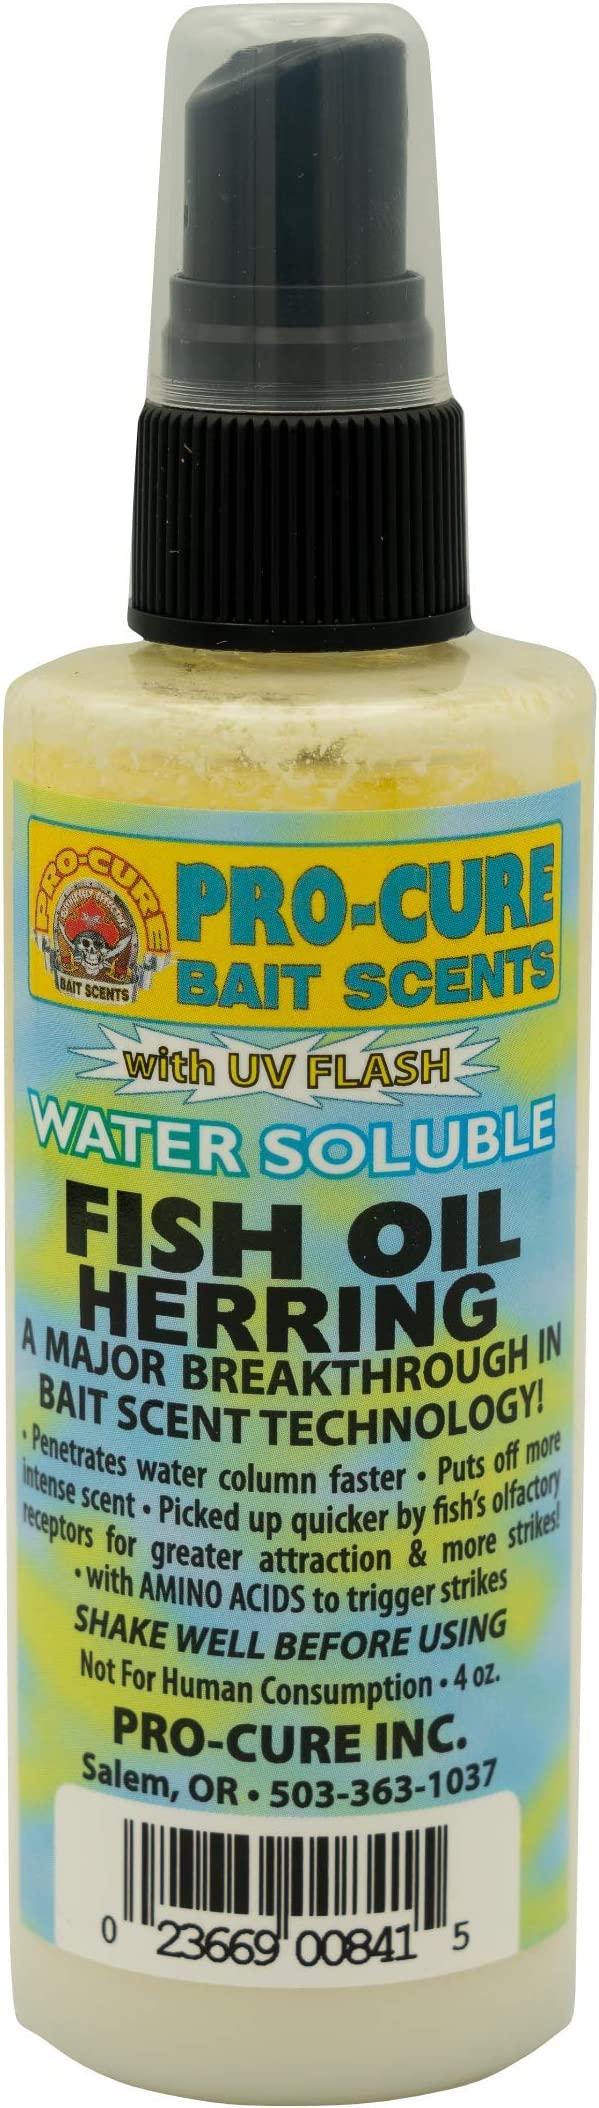 Pro-Cure Water Soluble Fish Oil Herring